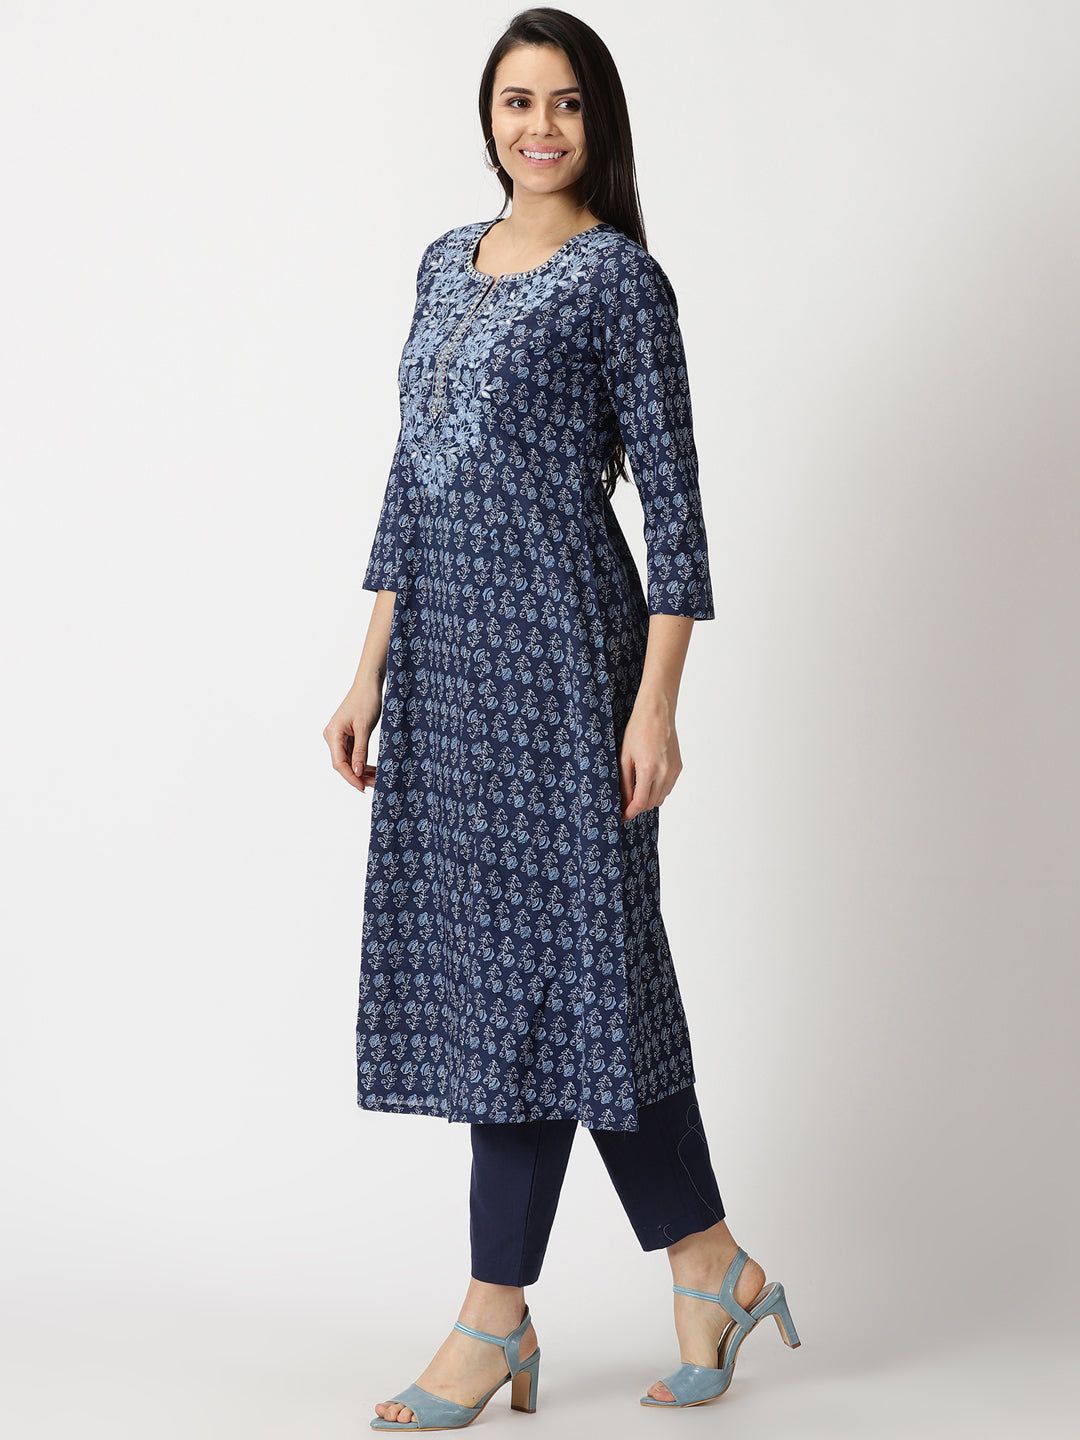 Navy Blue Ethnic Floral Print A-line Kurta with Embroidered Neck